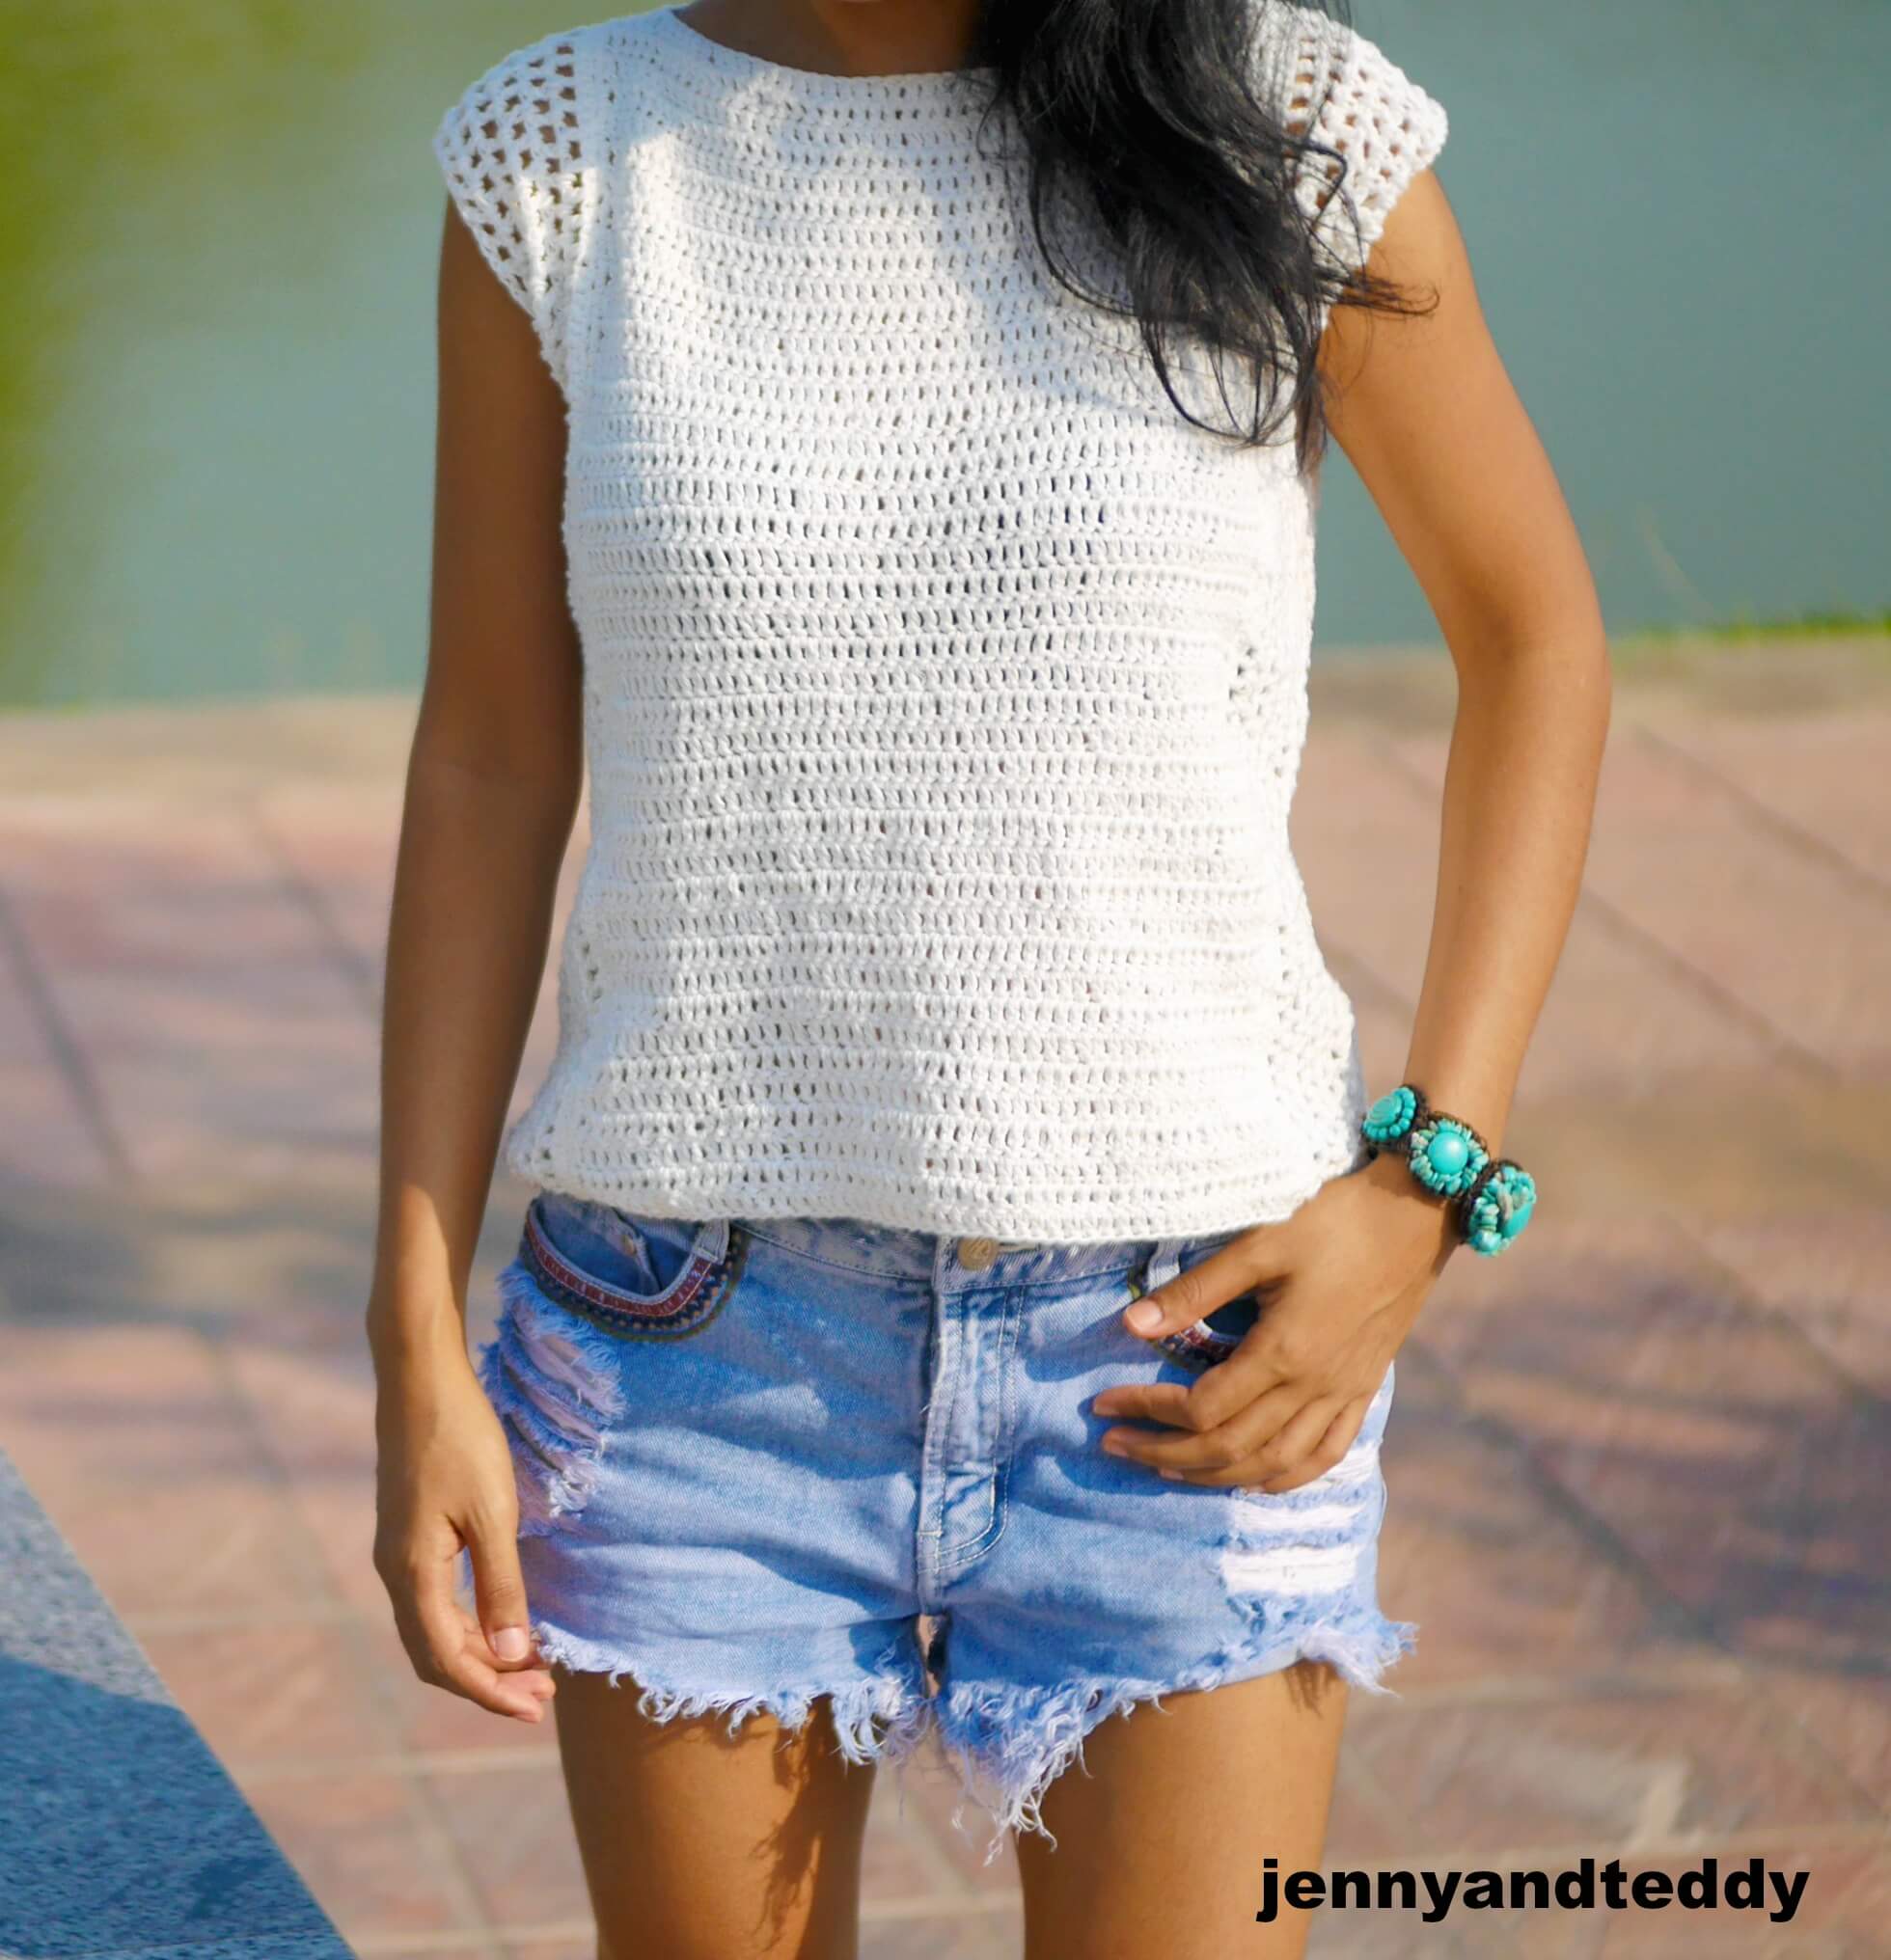 My Top 10 Cute and Colorful Girly Summer Blouses for Women!